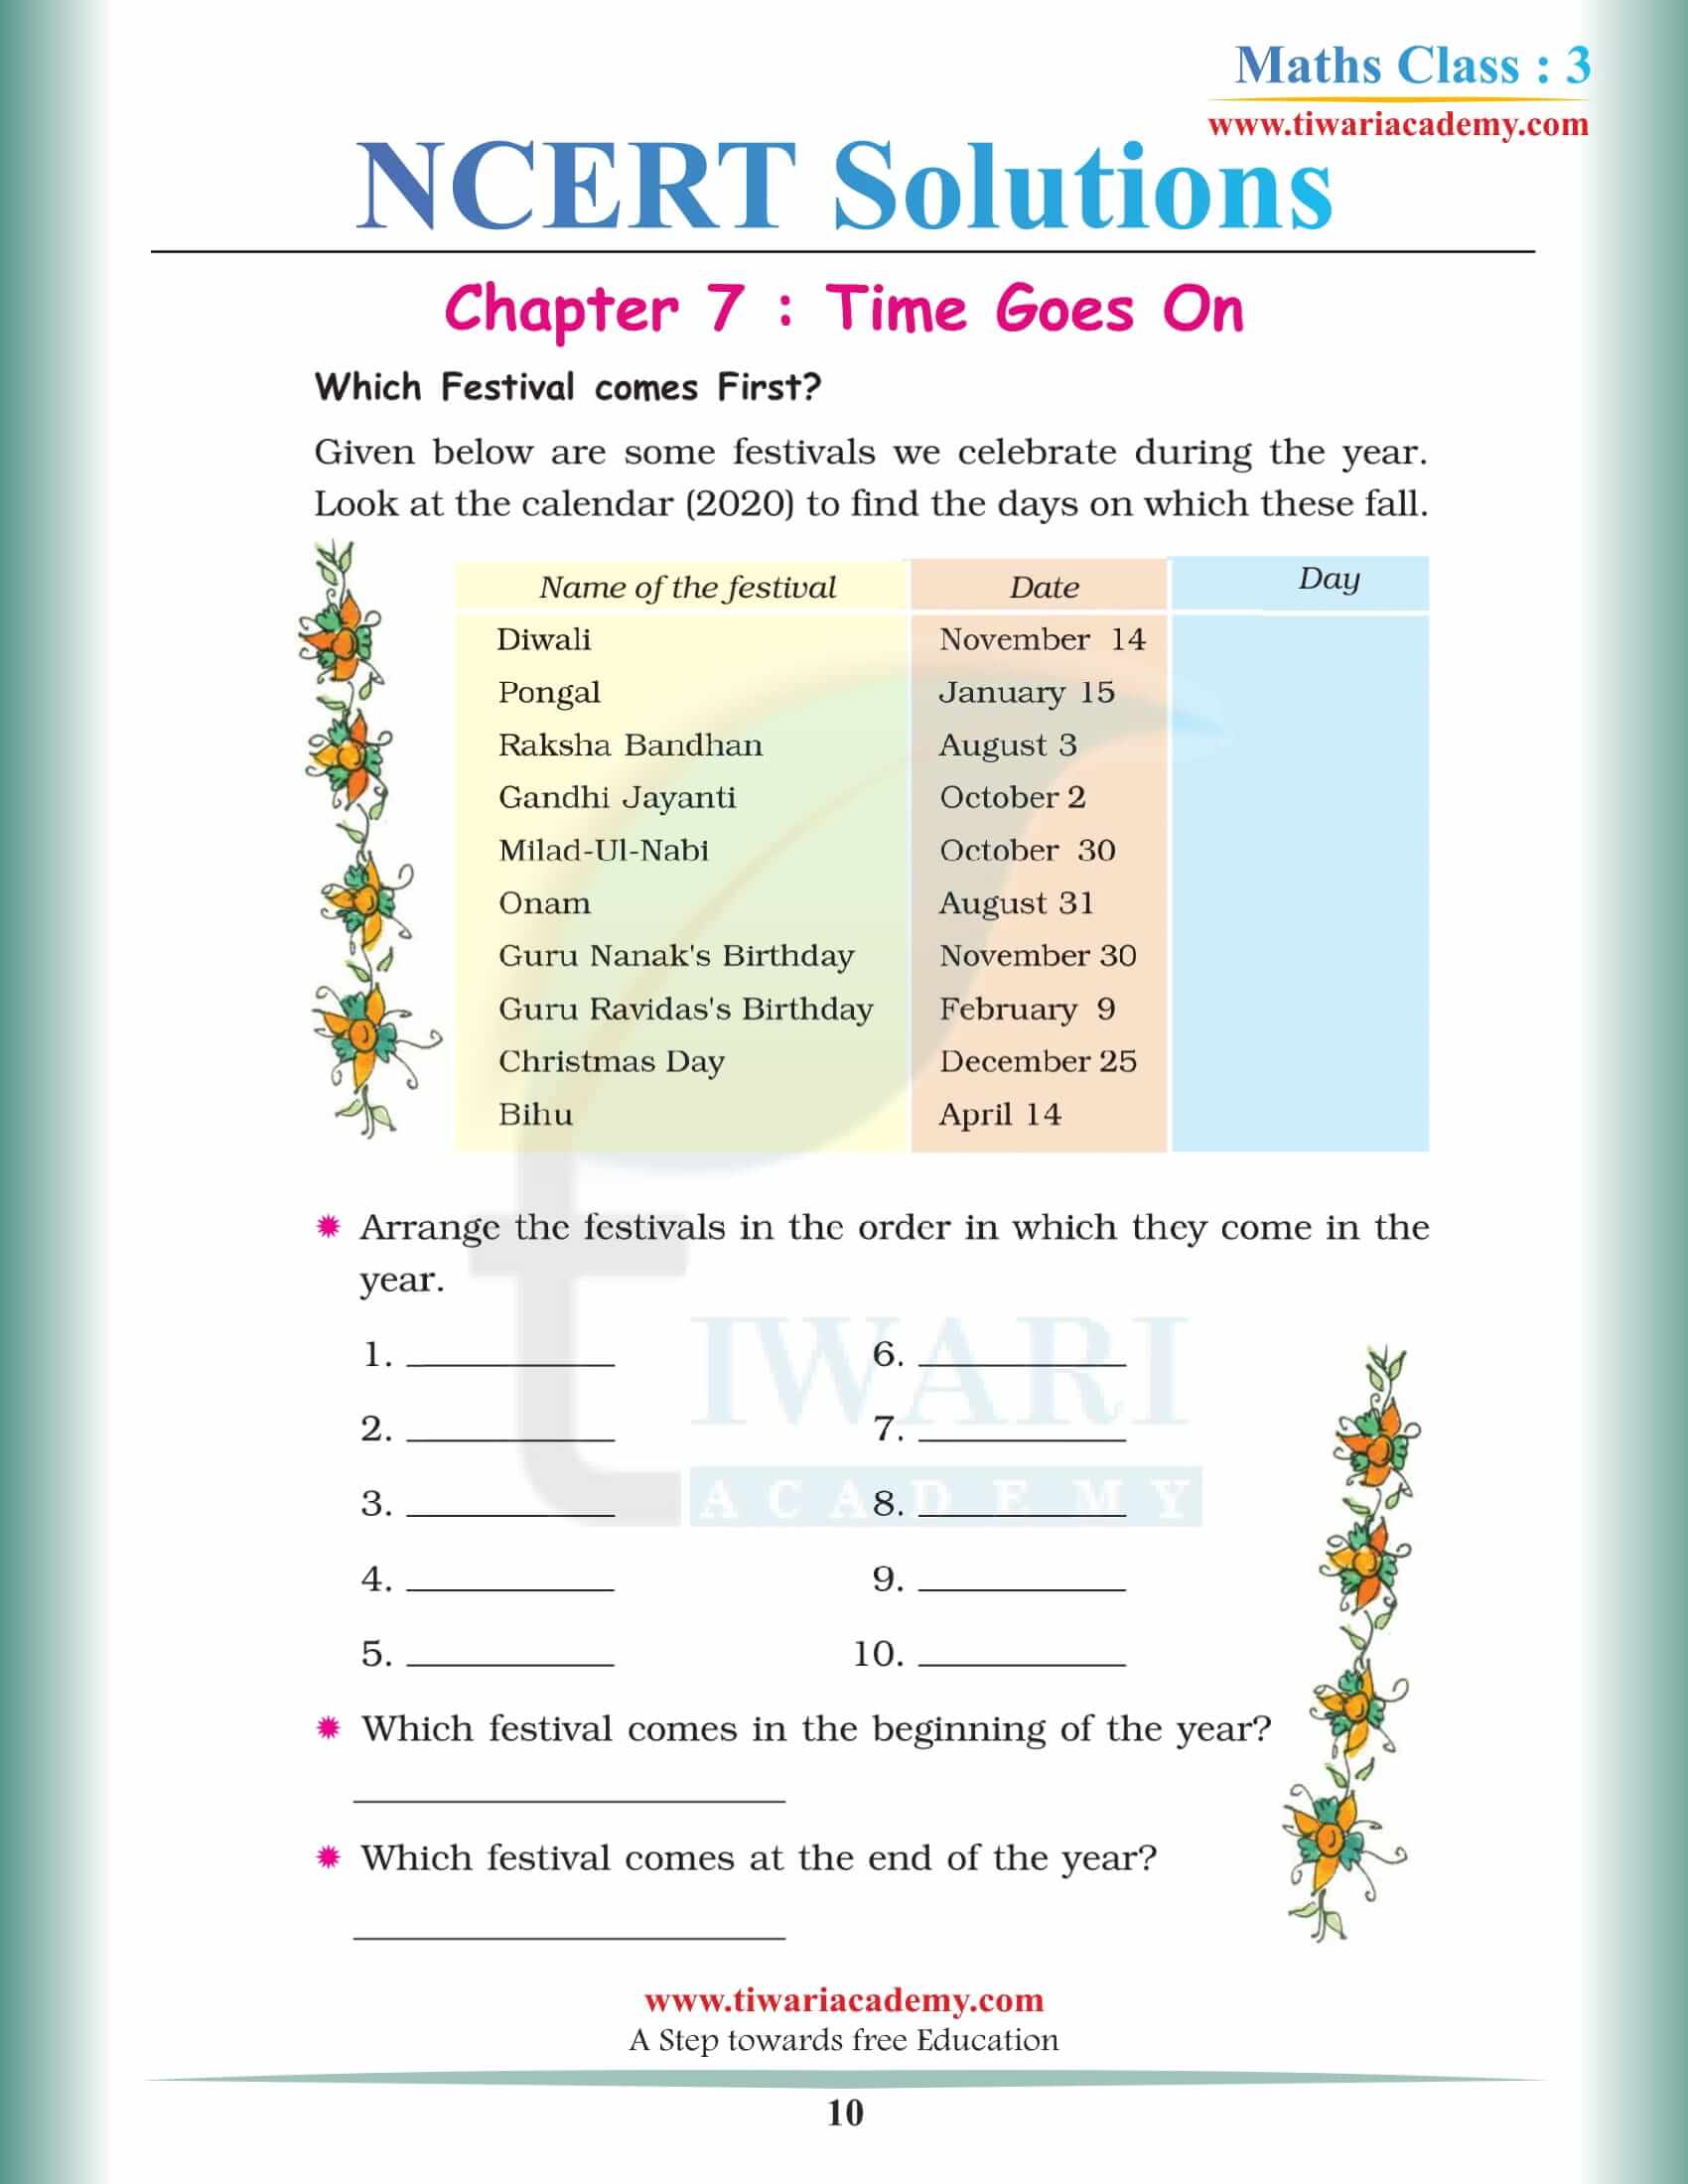 Class 3 Maths NCERT Chapter 7 Solutions in PDF